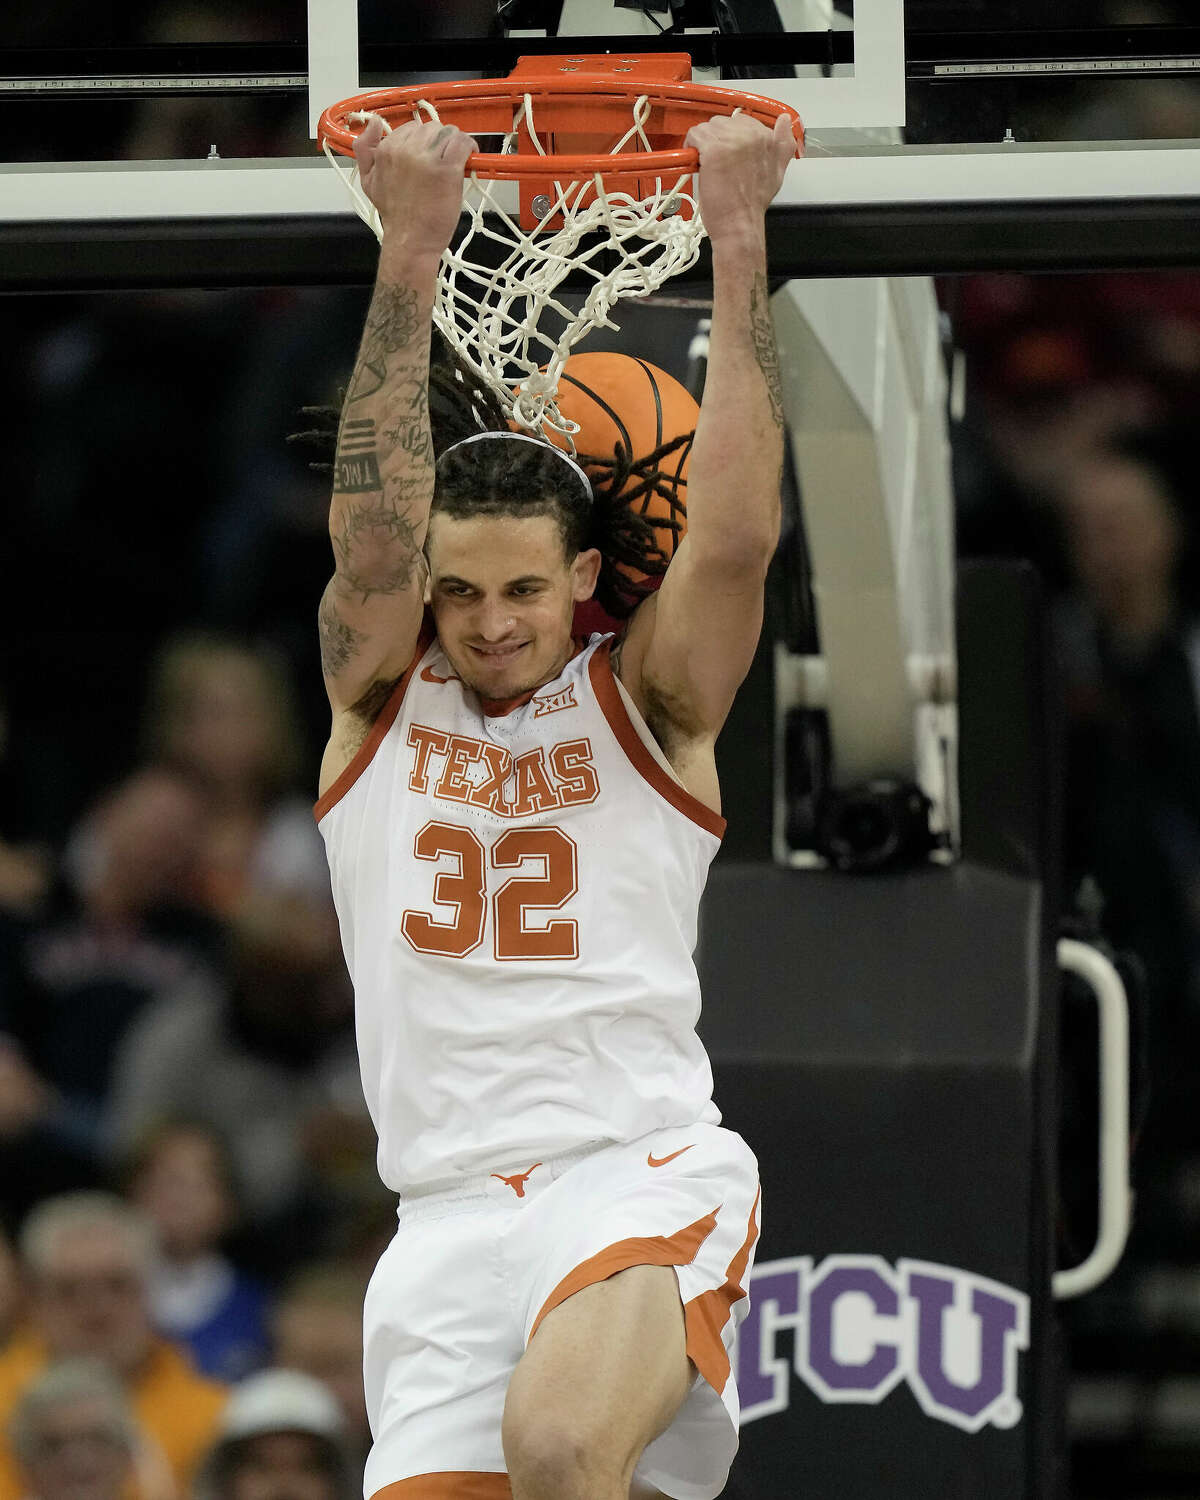 Texas forward Christian Bishop dunks the ball during the first half of an NCAA college basketball game against TCU in the semifinal round of the Big 12 Conference tournament Friday, March 10, 2023, in Kansas City, Mo. (AP Photo/Charlie Riedel)